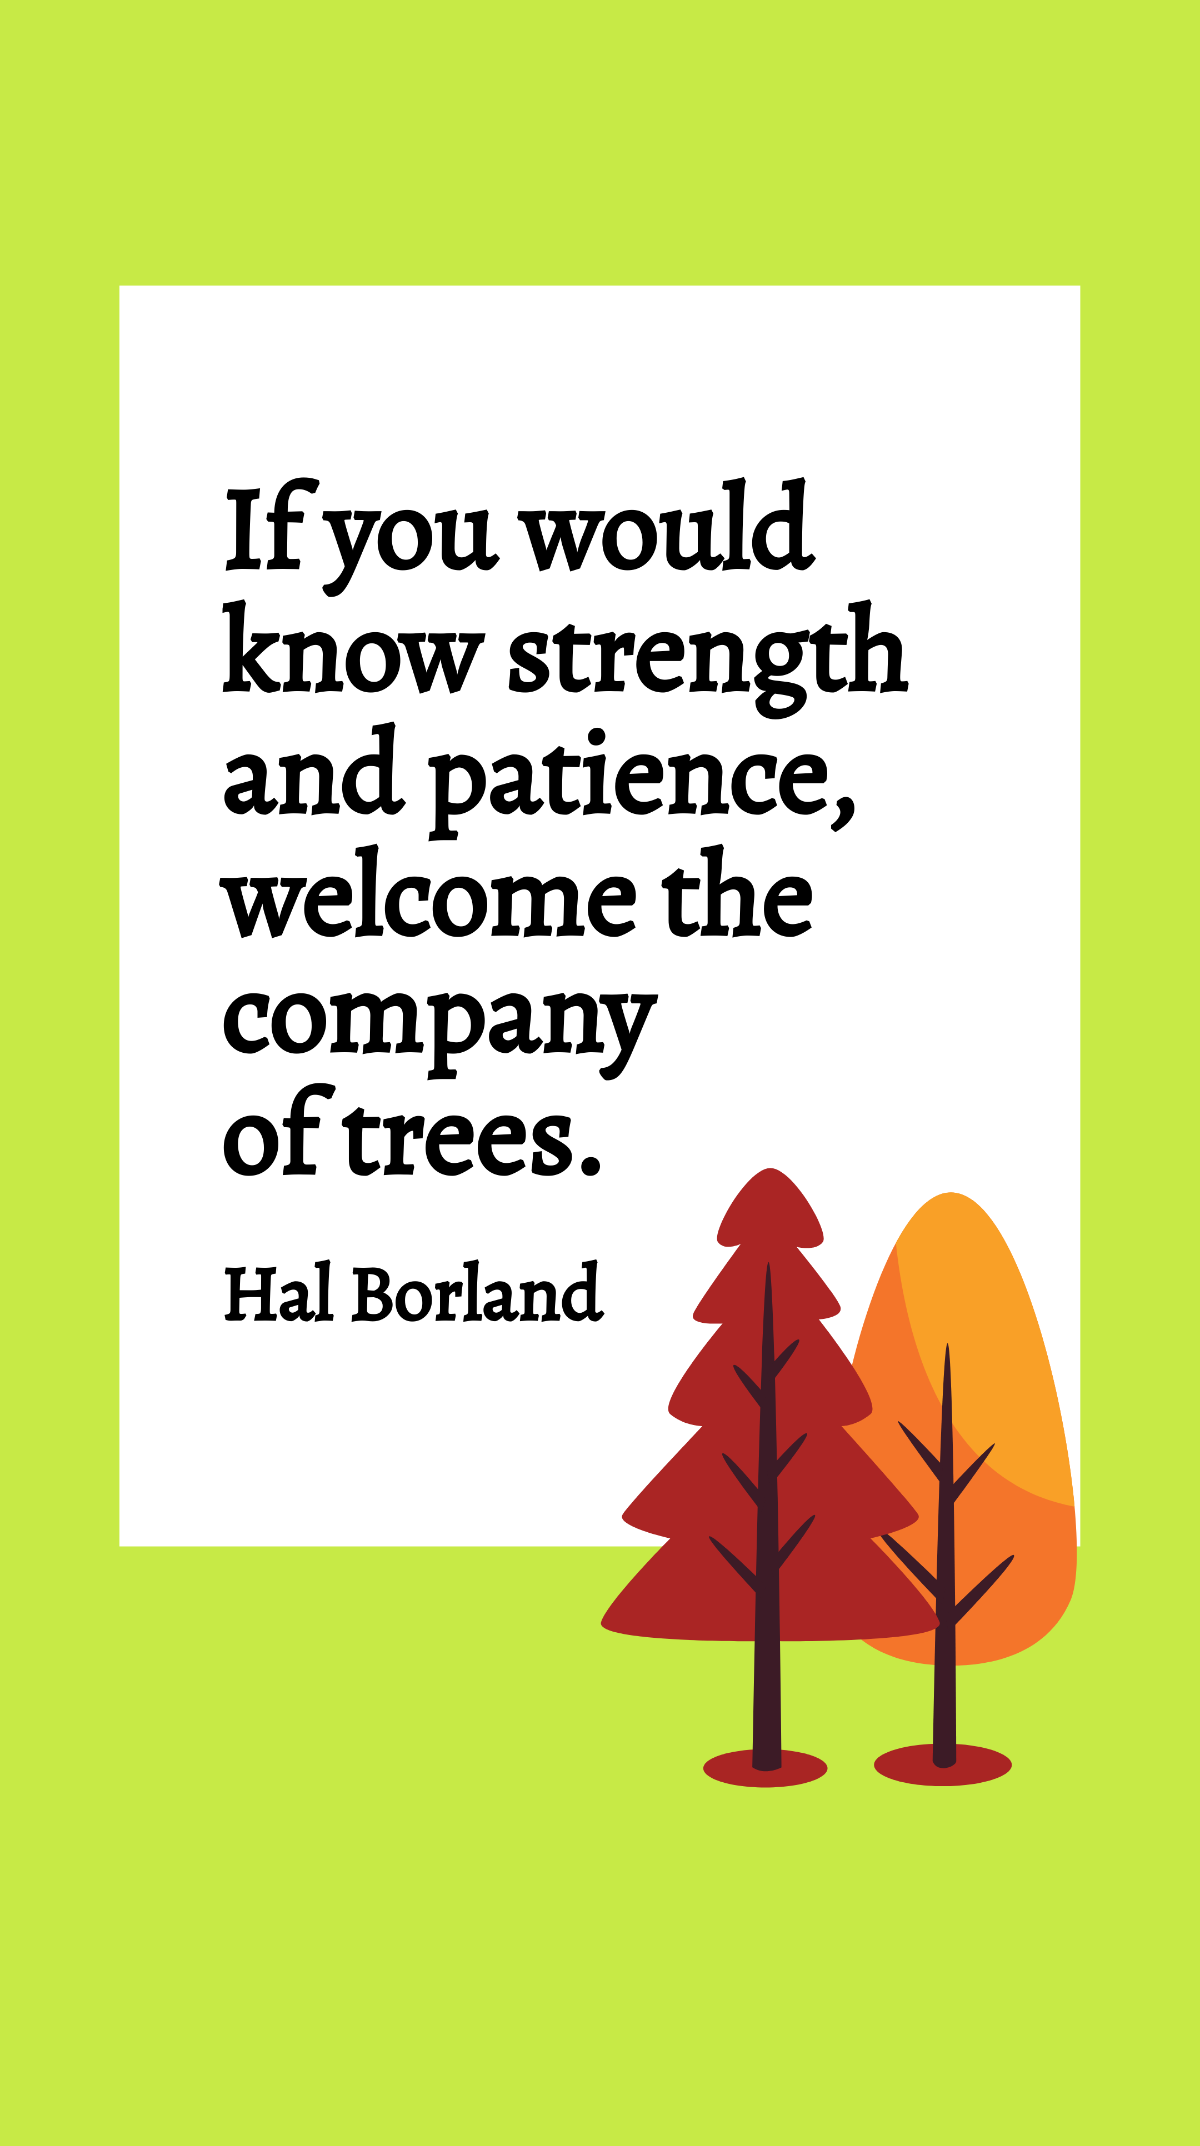 Hal Borland - If you would know strength and patience, welcome the company of trees. Template